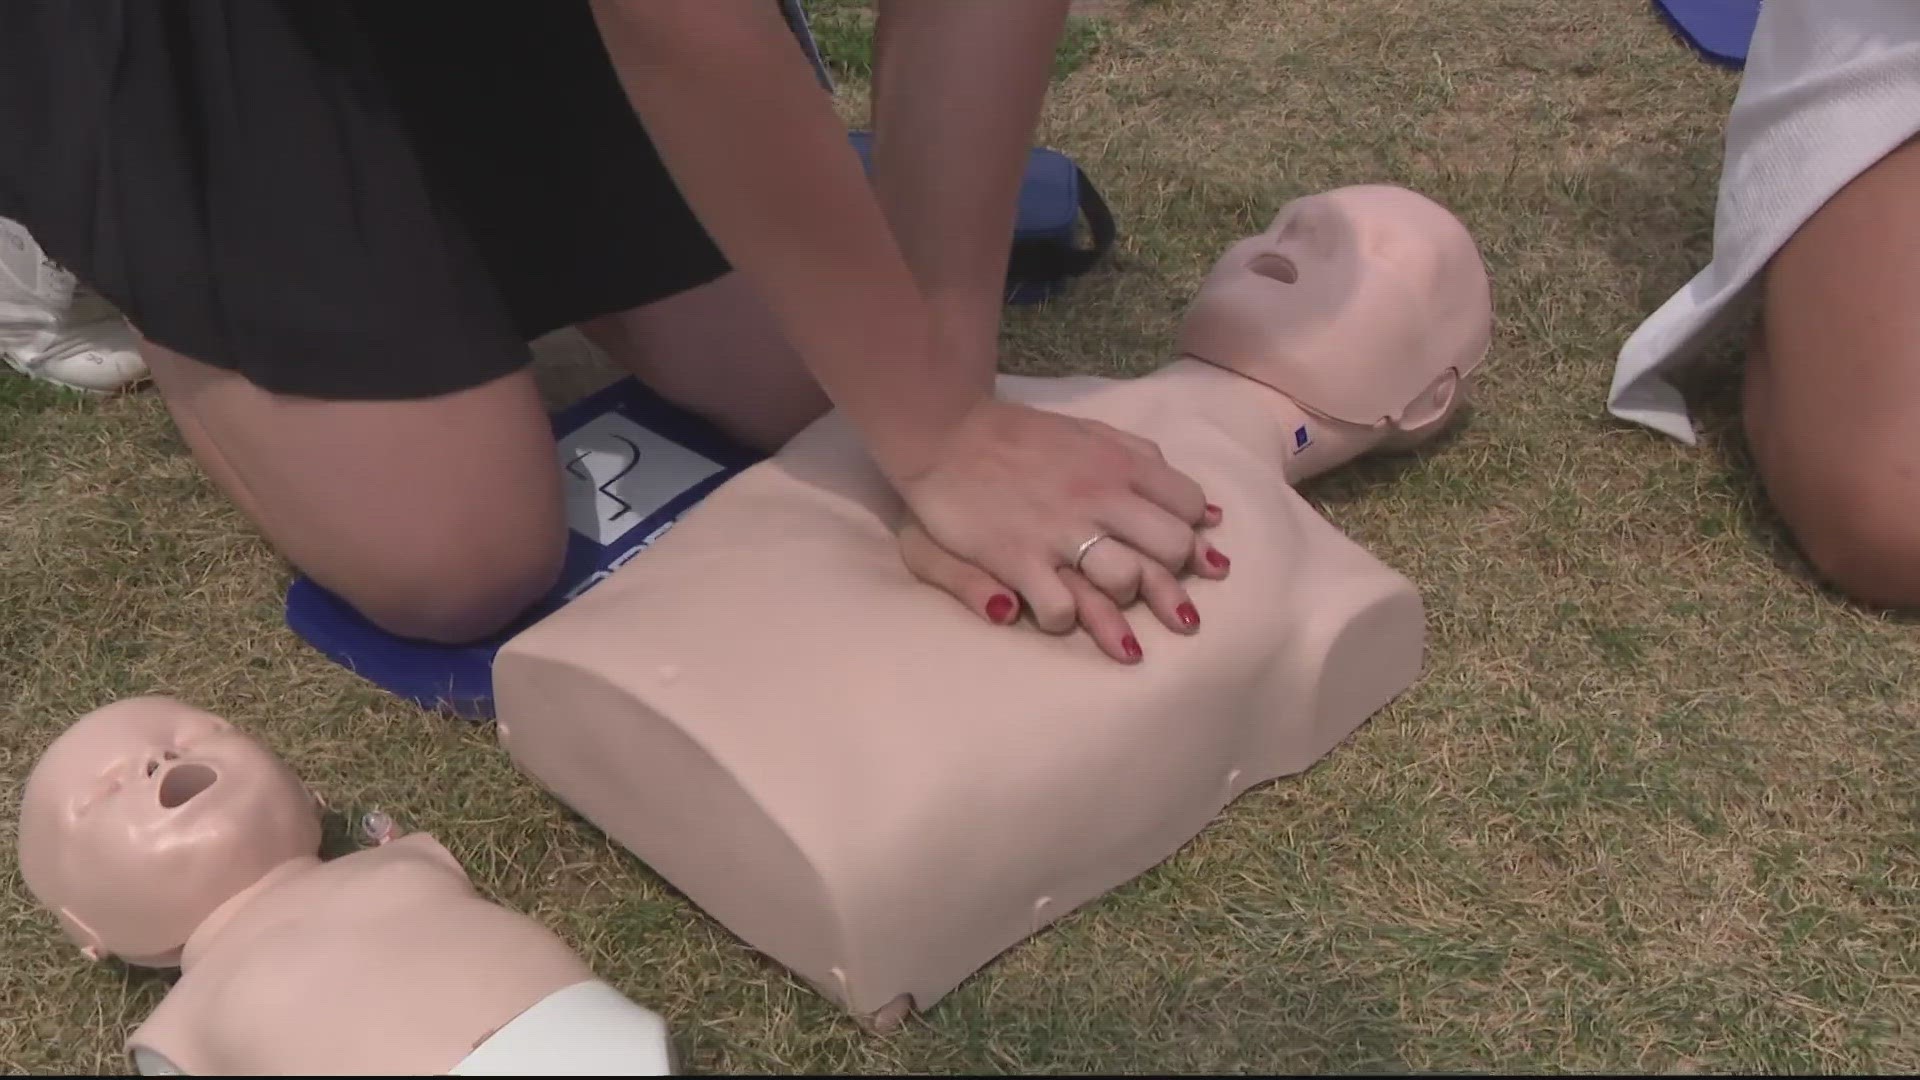 June 1-7 is National CPR and AED Awareness Week.